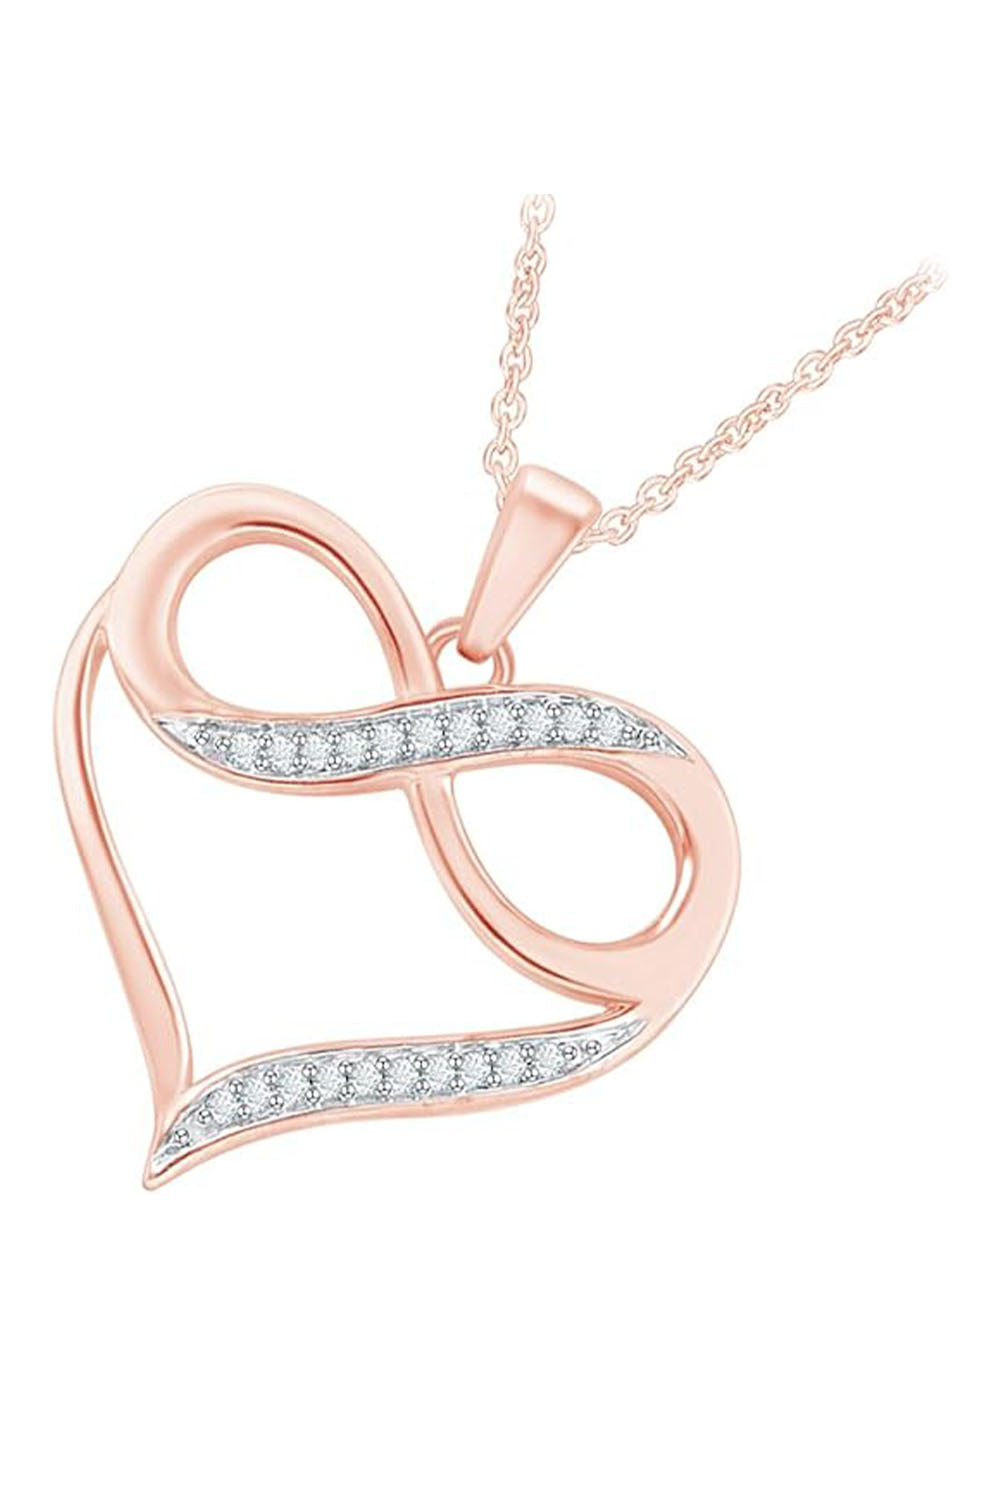 Rose Gold Color Heart with Infinity Pendant Necklace, Infinity Necklace